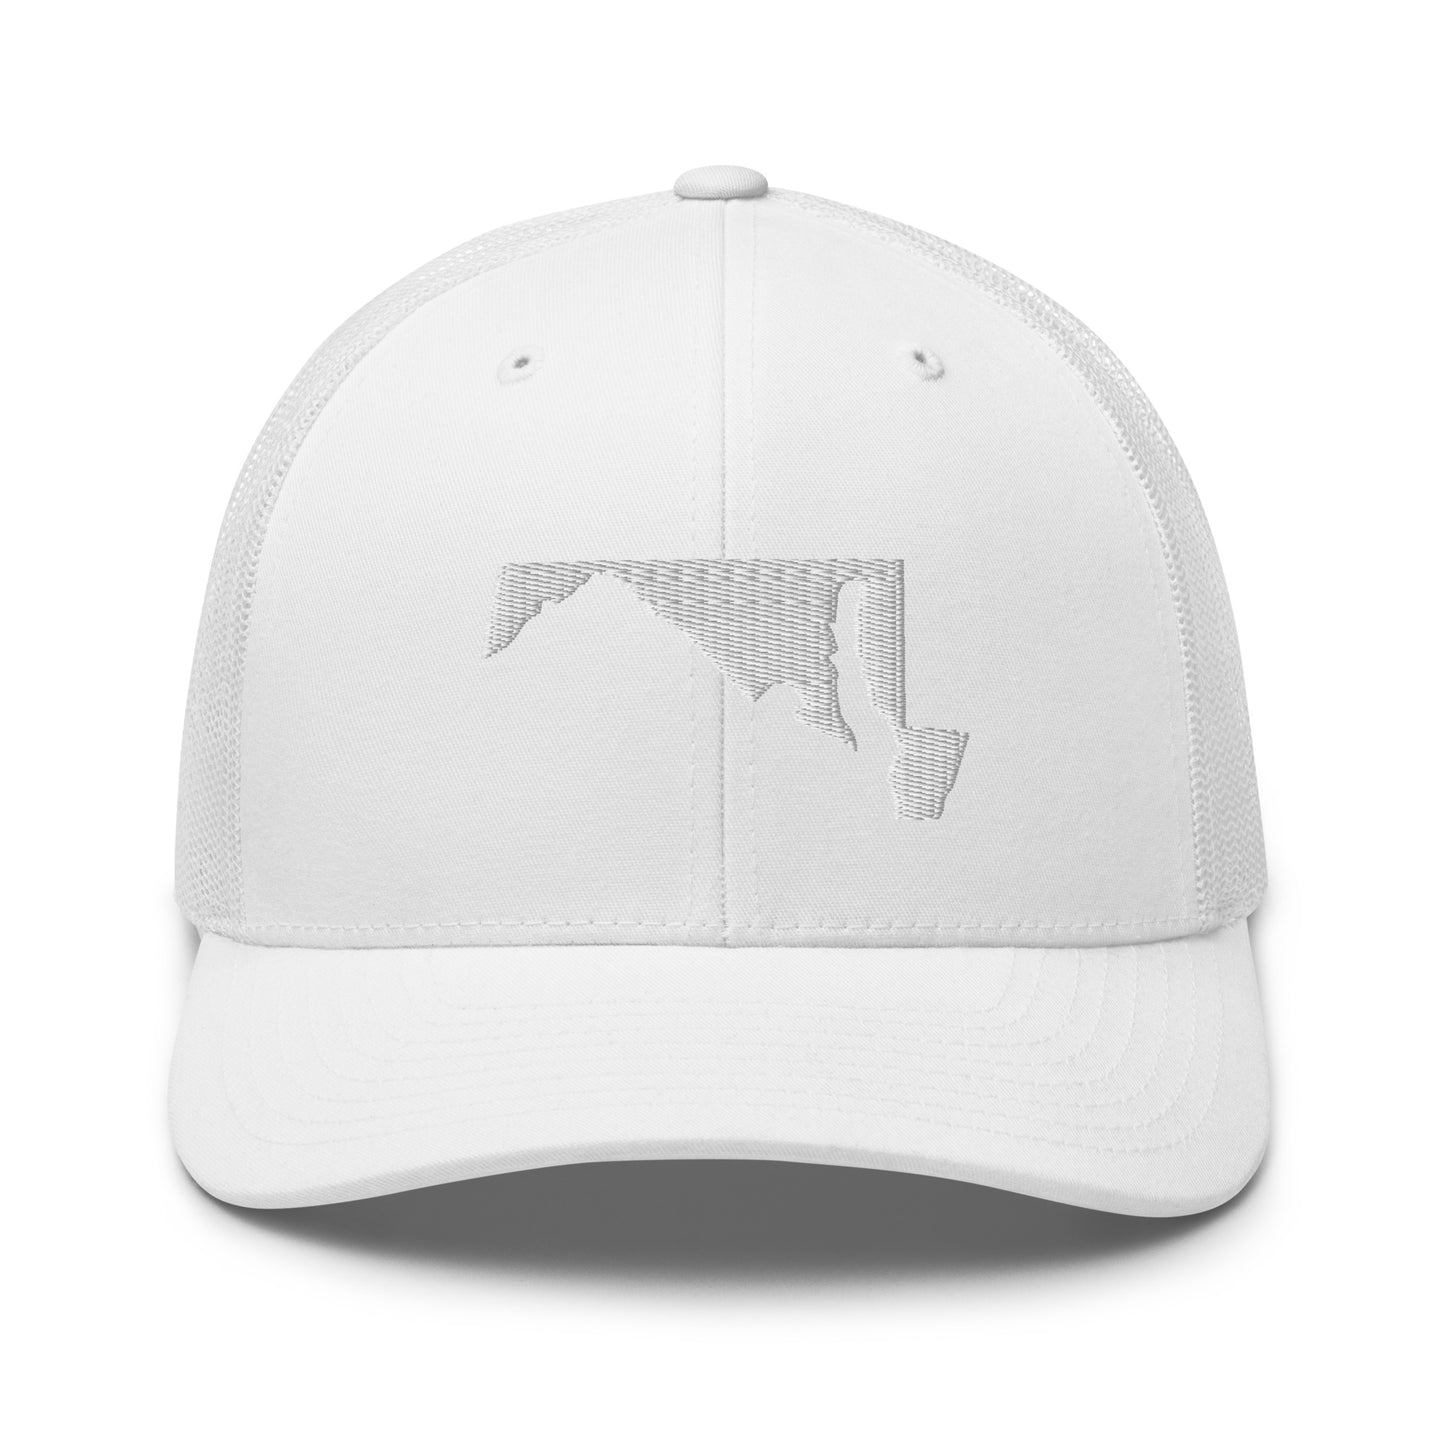 Maryland State Silhouette Mid 6 Panel Snapback Trucker Hat